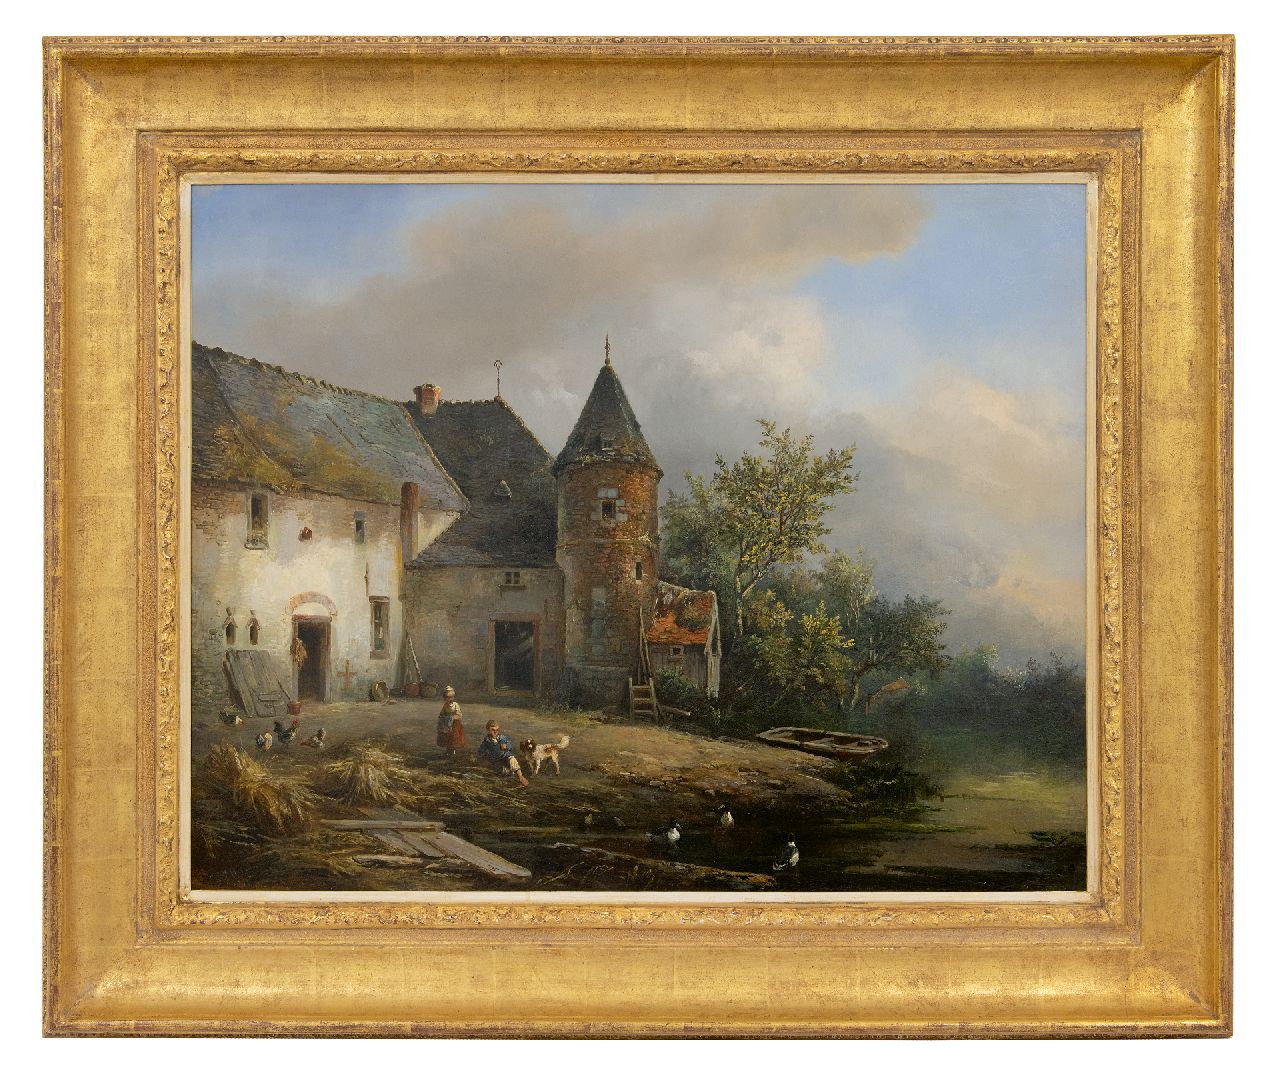 Wagner W.G.  | Willem George Wagner, Children playing on a farmyard, oil on panel 61.0 x 77.1 cm, signed l.l.